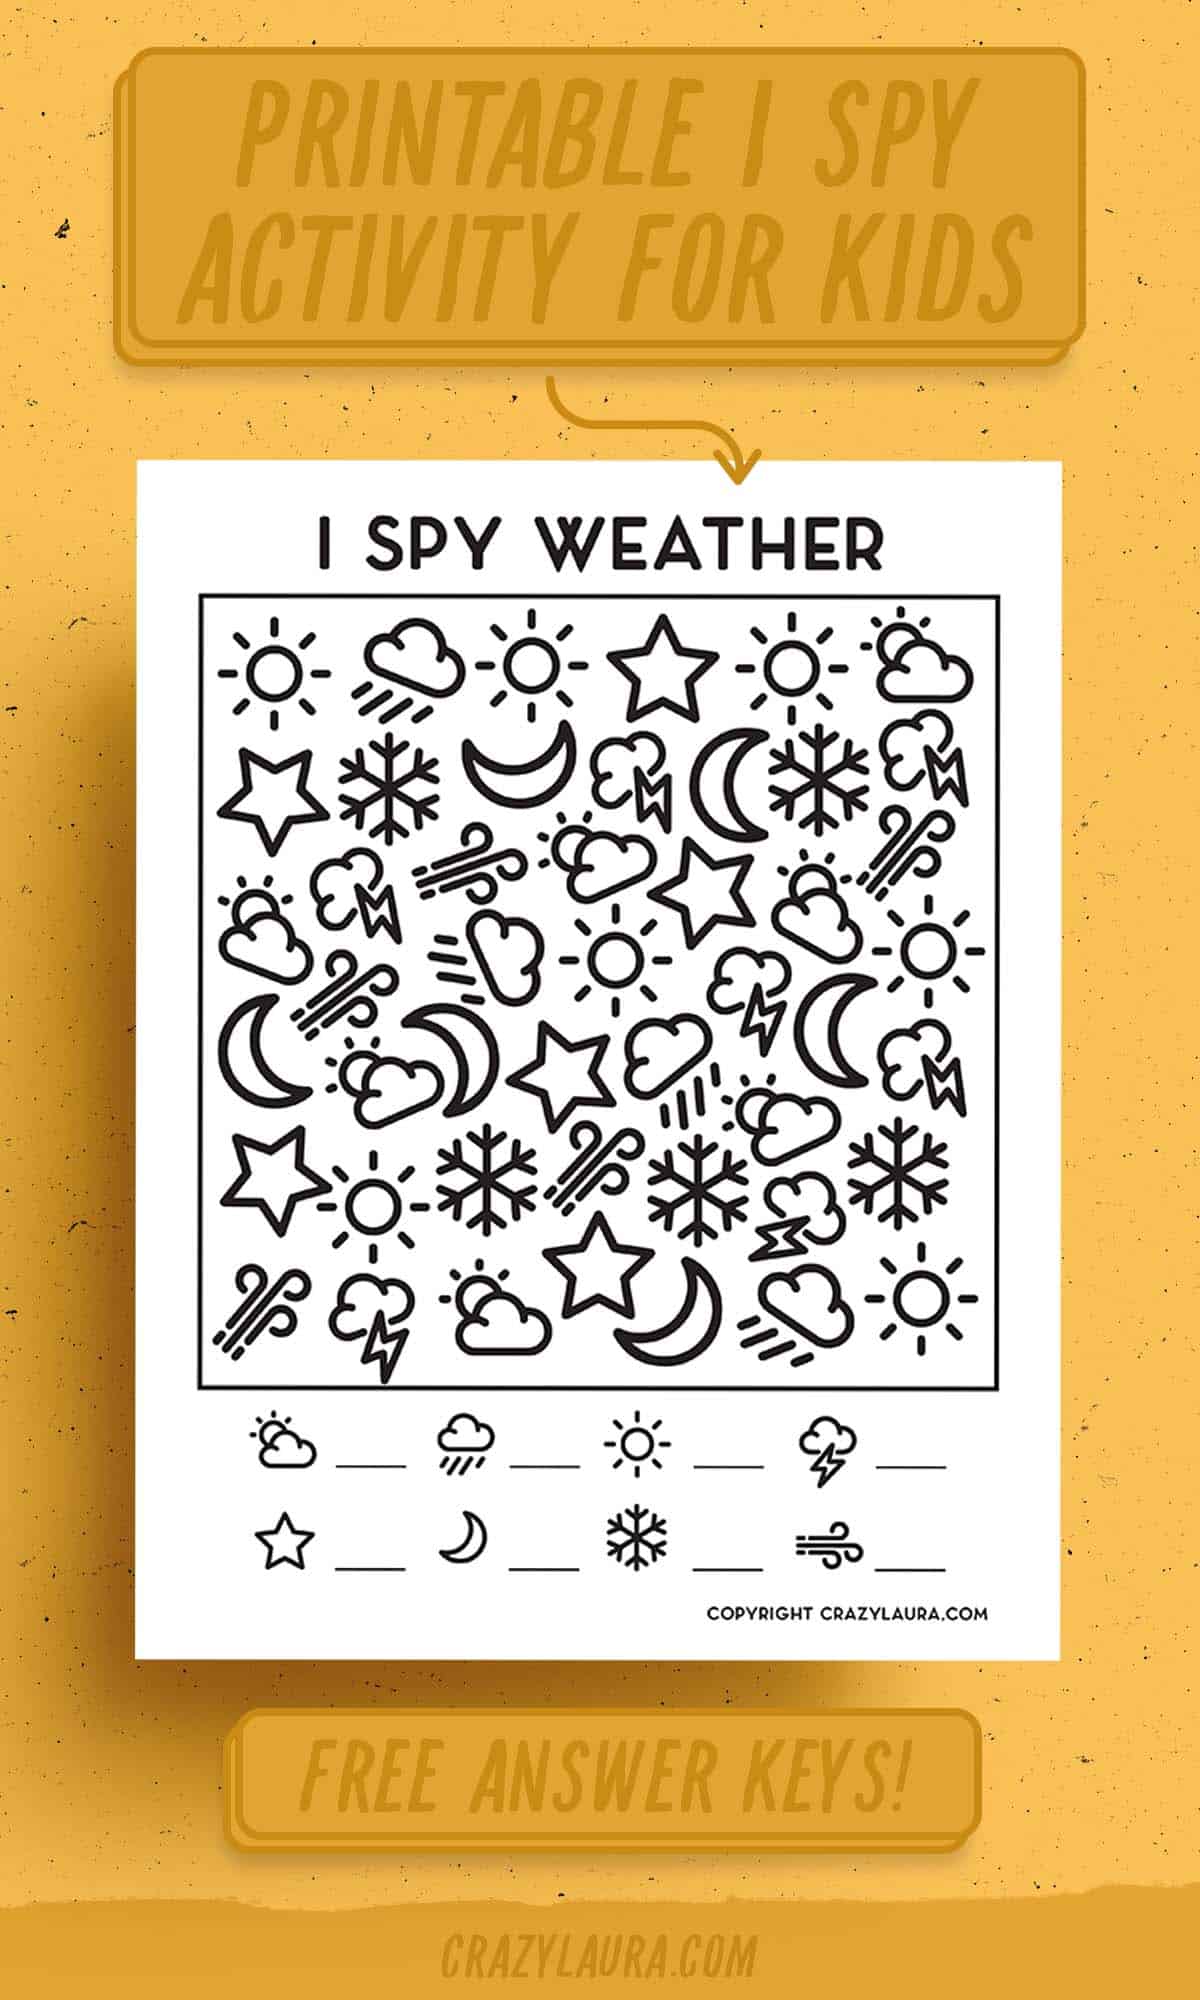 ispy weather game for kids